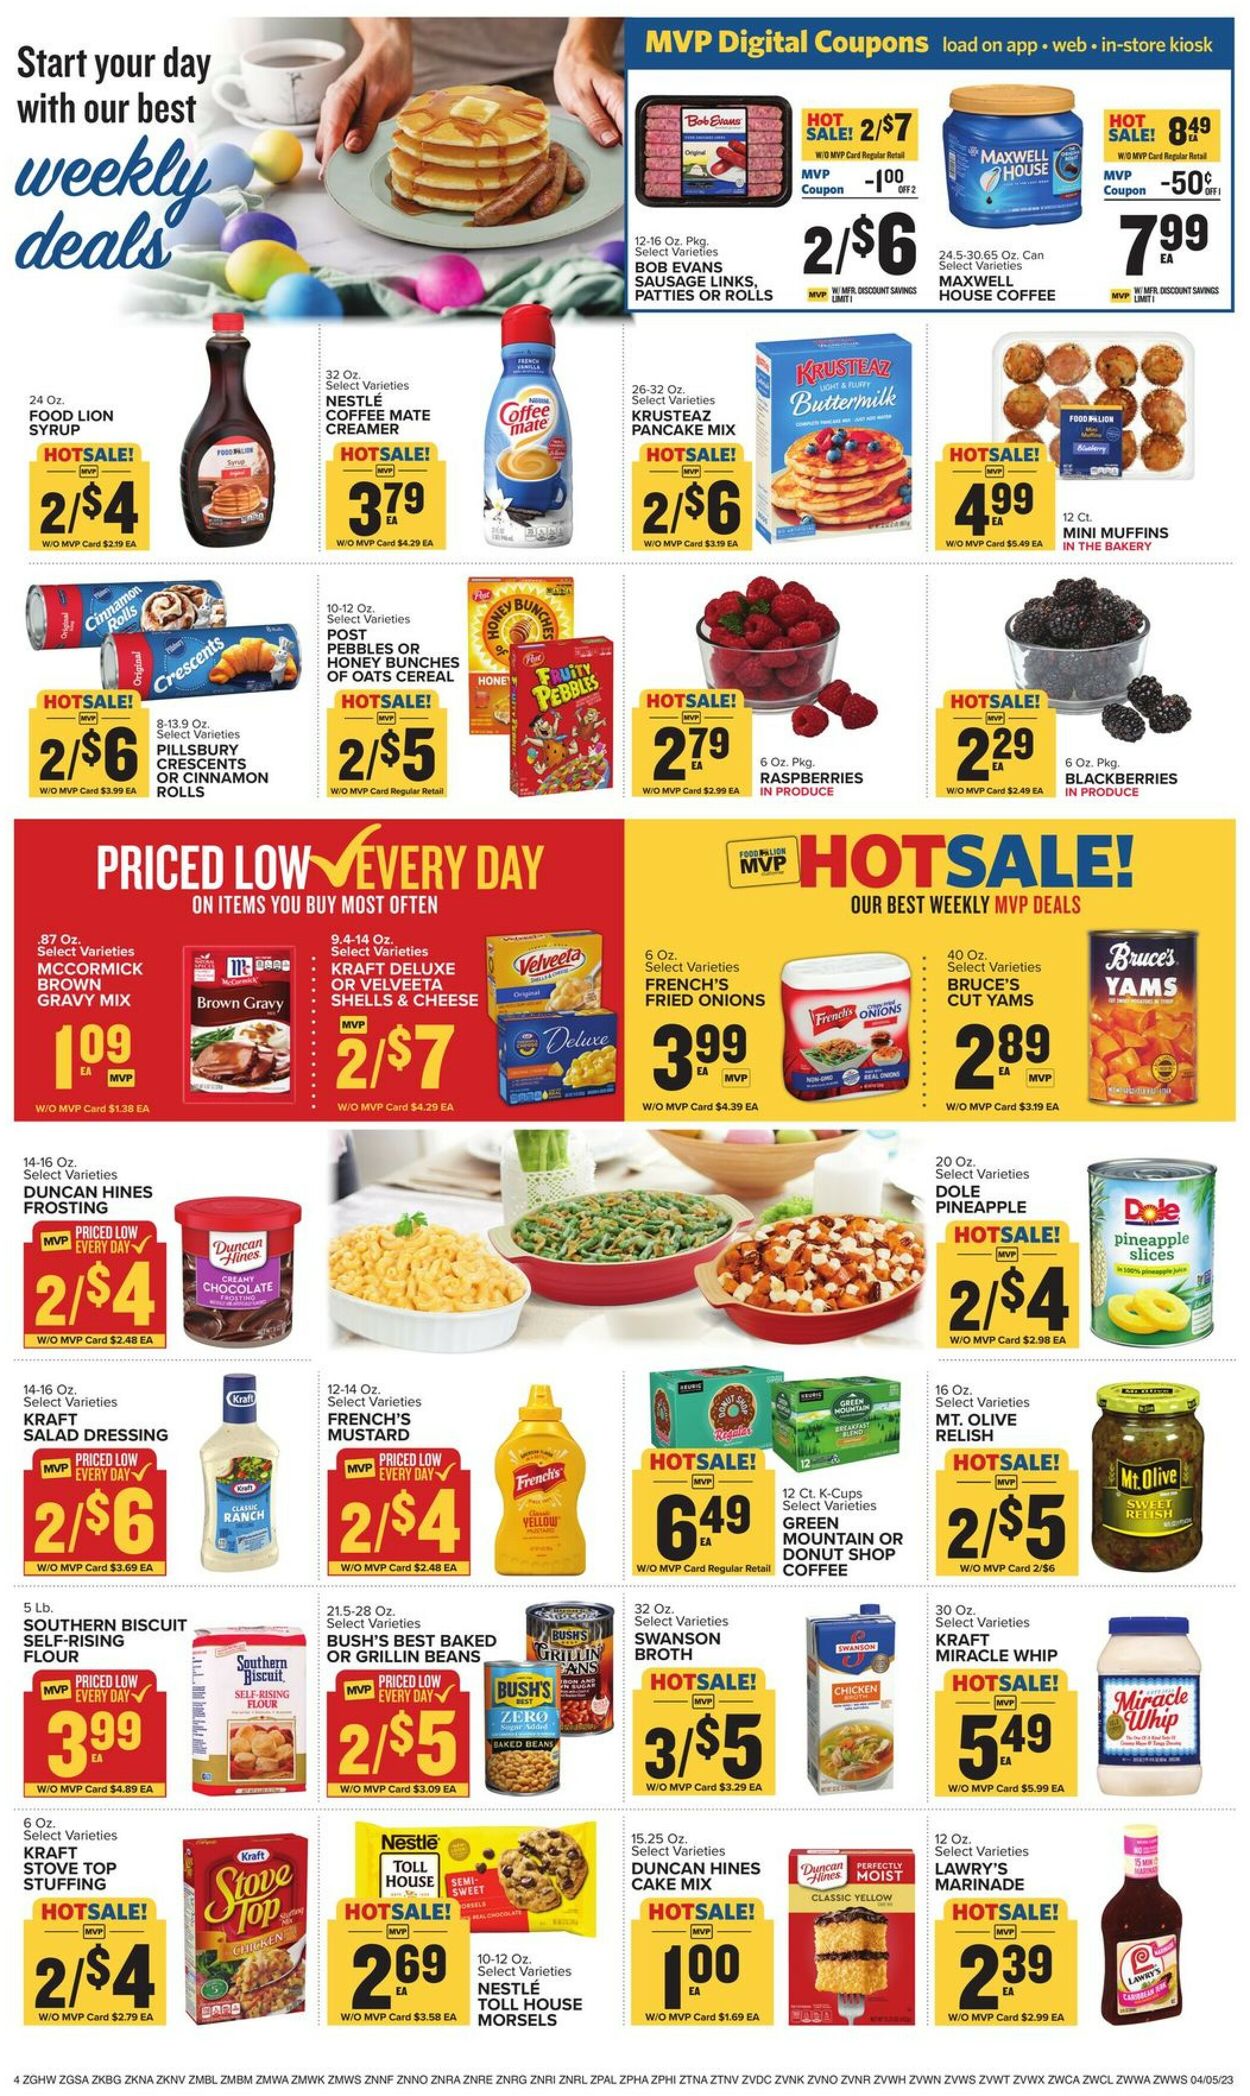 Catalogue Food Lion from 04/05/2023